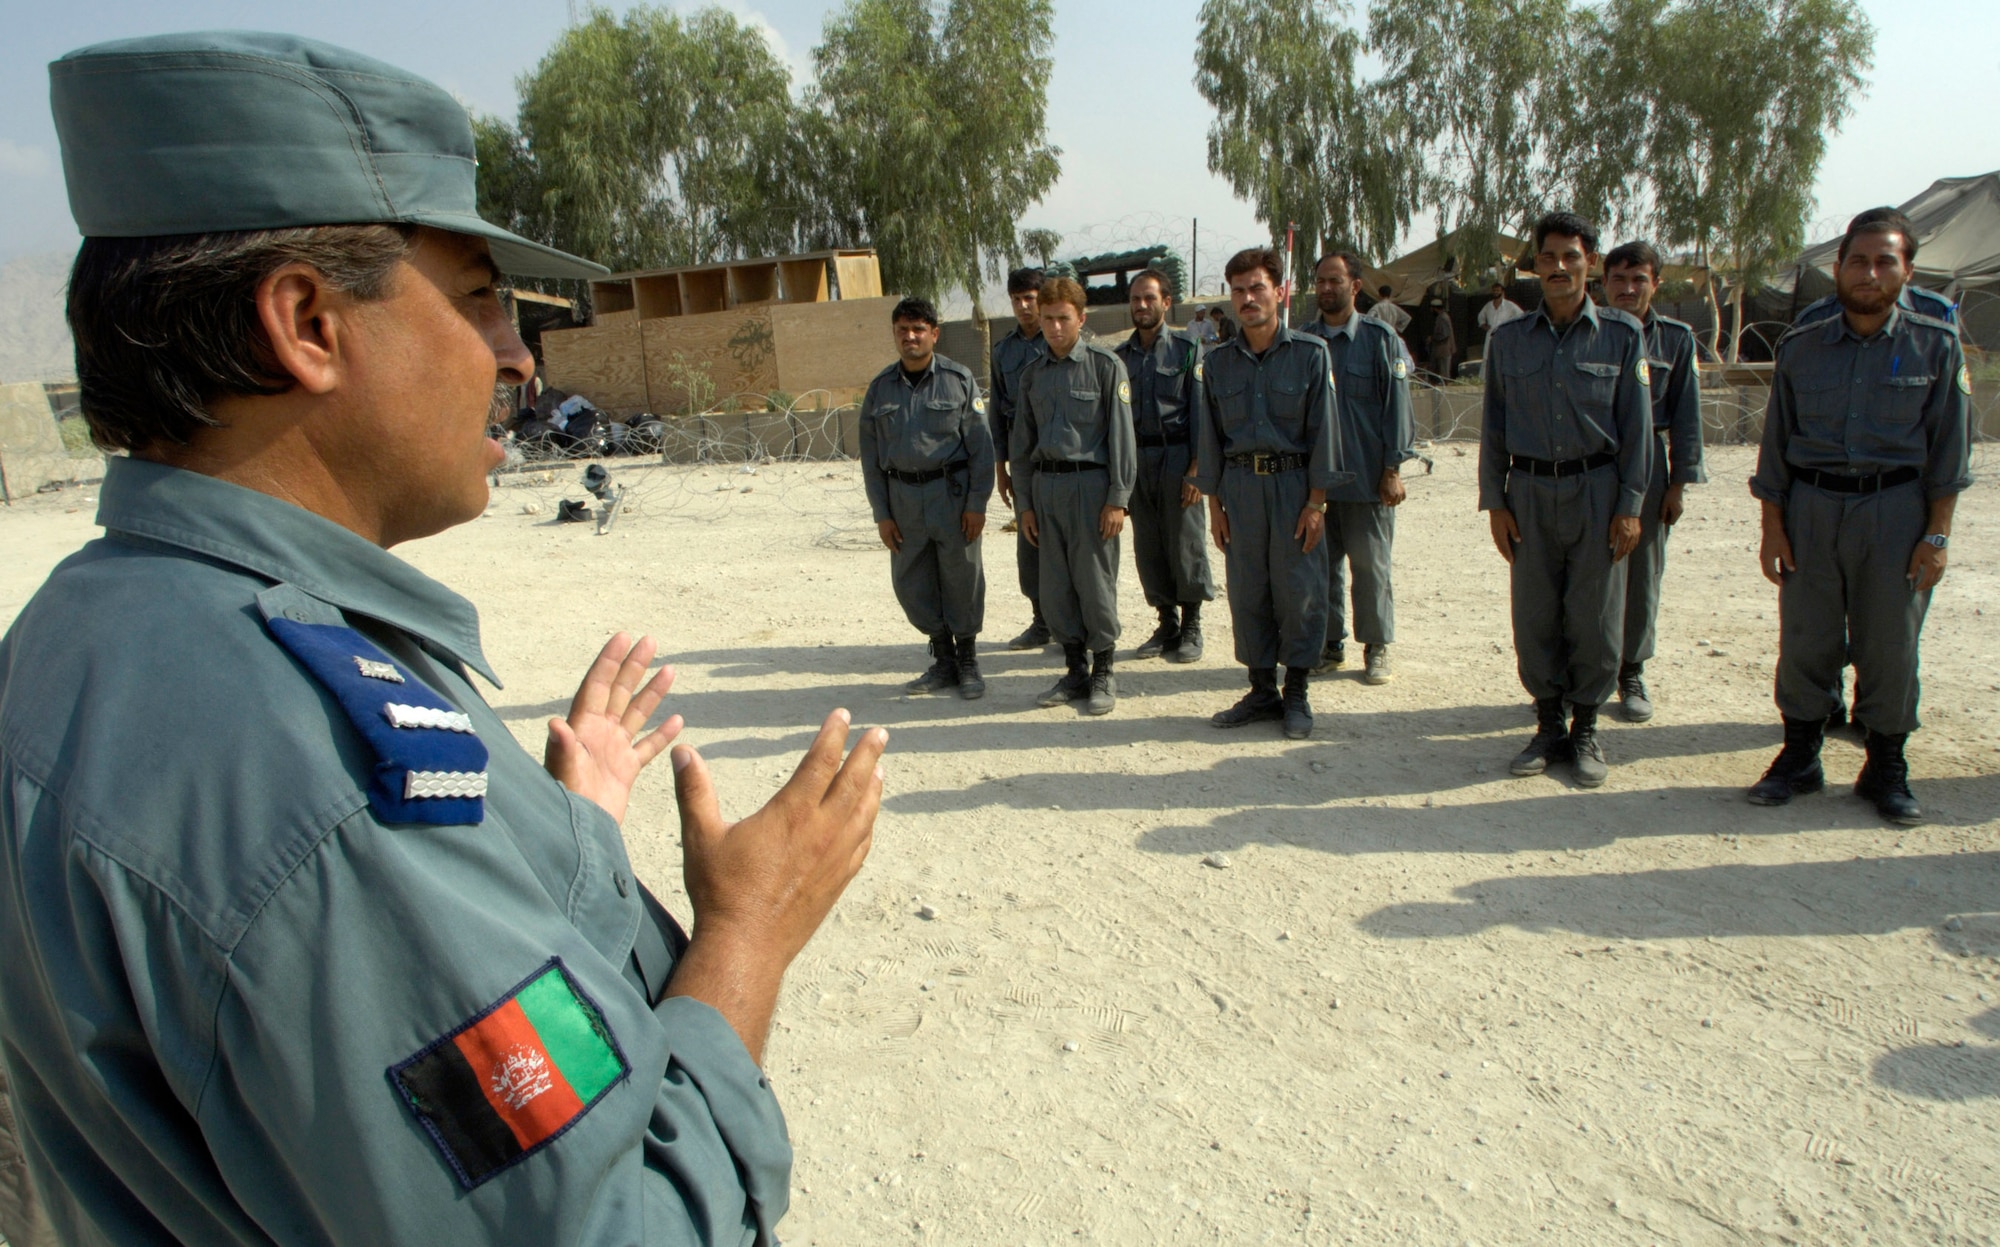 Afghan National Police Capt. Muhammad Ajan explains proper reporting procedures to Afghan National Auxiliary Police trainees during drill practice Sept. 3 at Forward Operating Base Mehtar Lam in Afghanistan's Laghman province. Afghan National police instructors are teaching the course on their own for the first time. Laghman is the first Afghanistan province to have Afghan instructors teaching an ANP course. The ANP instructors were competitively selected and completed an instructor development course taught at a regional training center. (U.S. Air Force photo/Master Sgt. Jim Varhegyi)